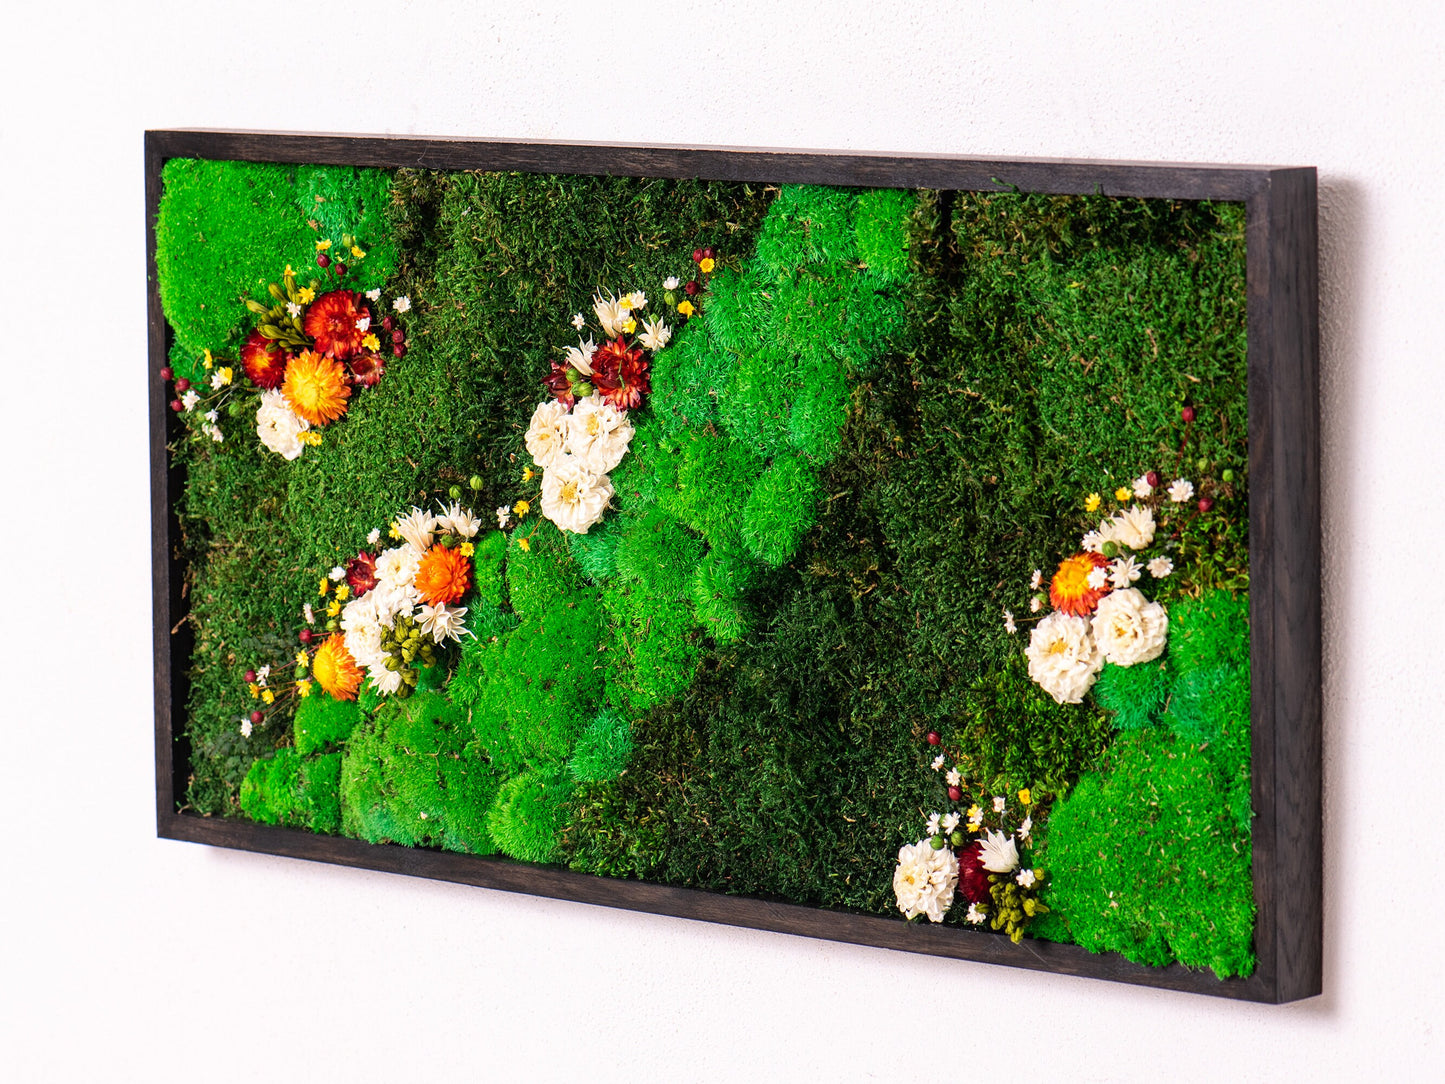 Transform Your Living Space: Framed Moss Art - The Ultimate Interior Gift Idea!